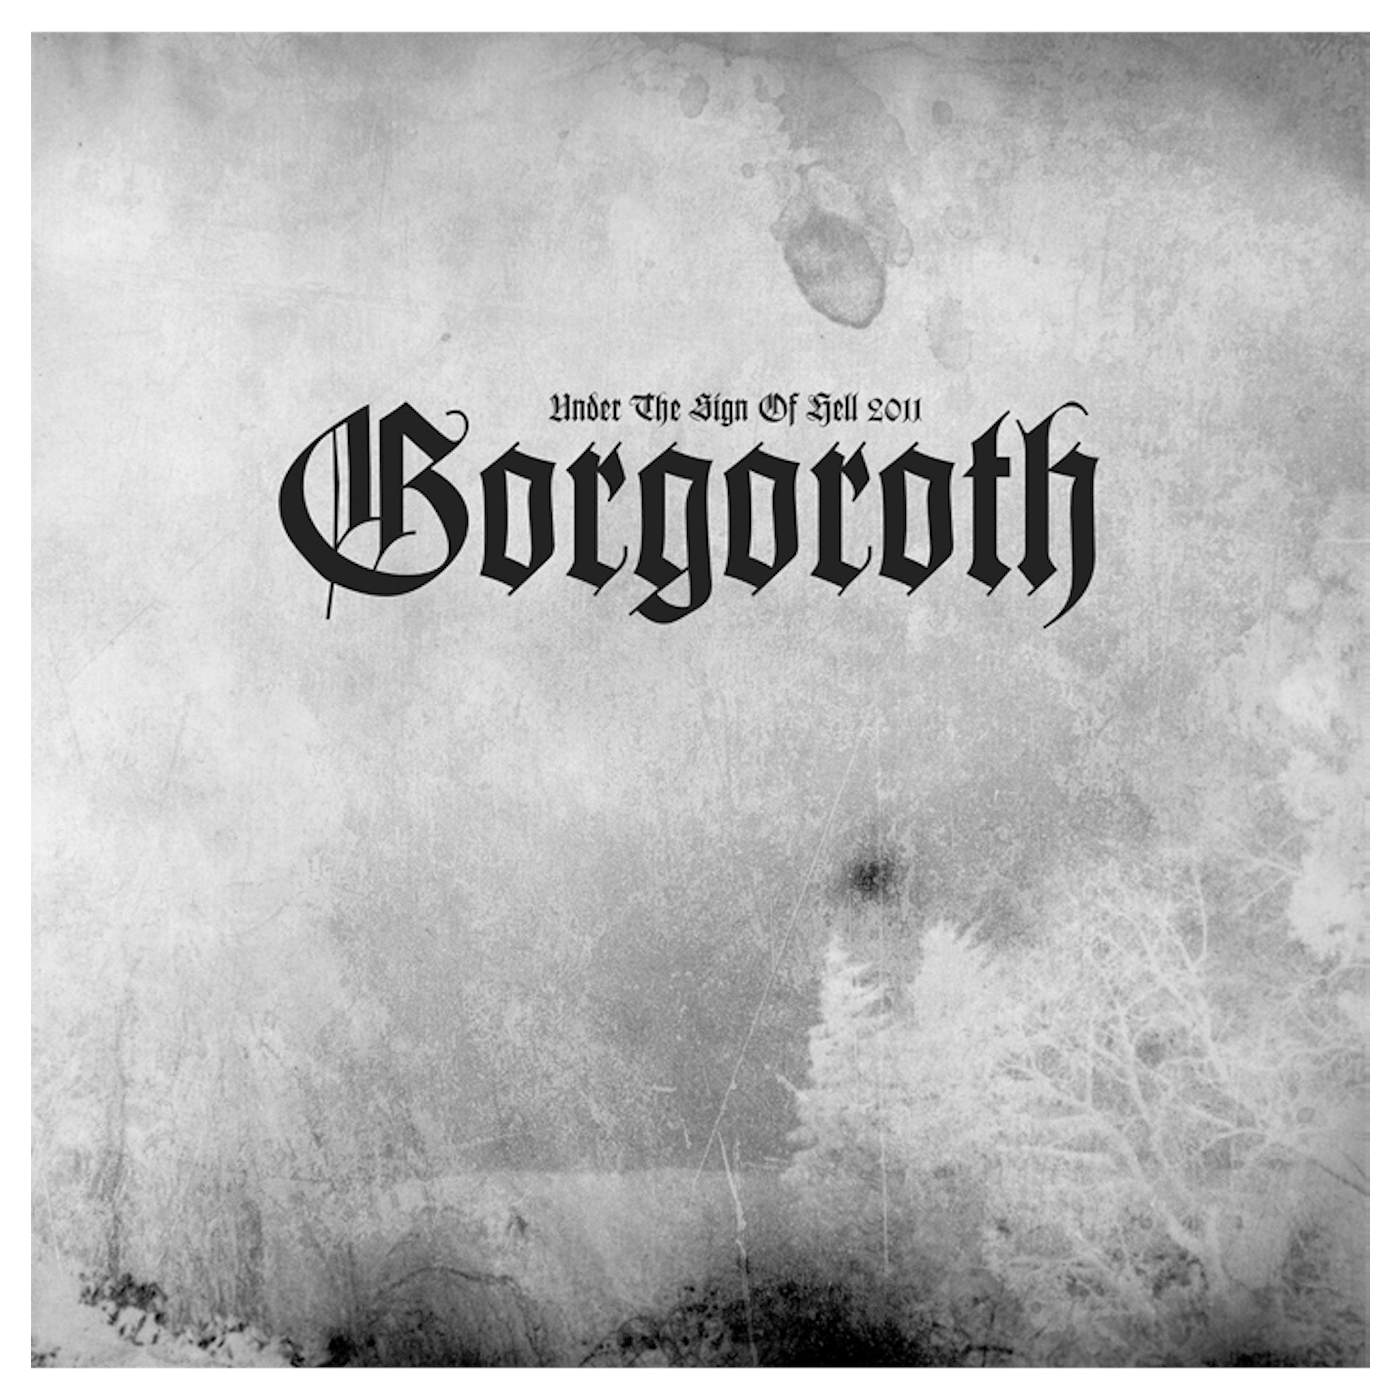 GORGOROTH - 'Under The Sign Of Hell 2011' CD